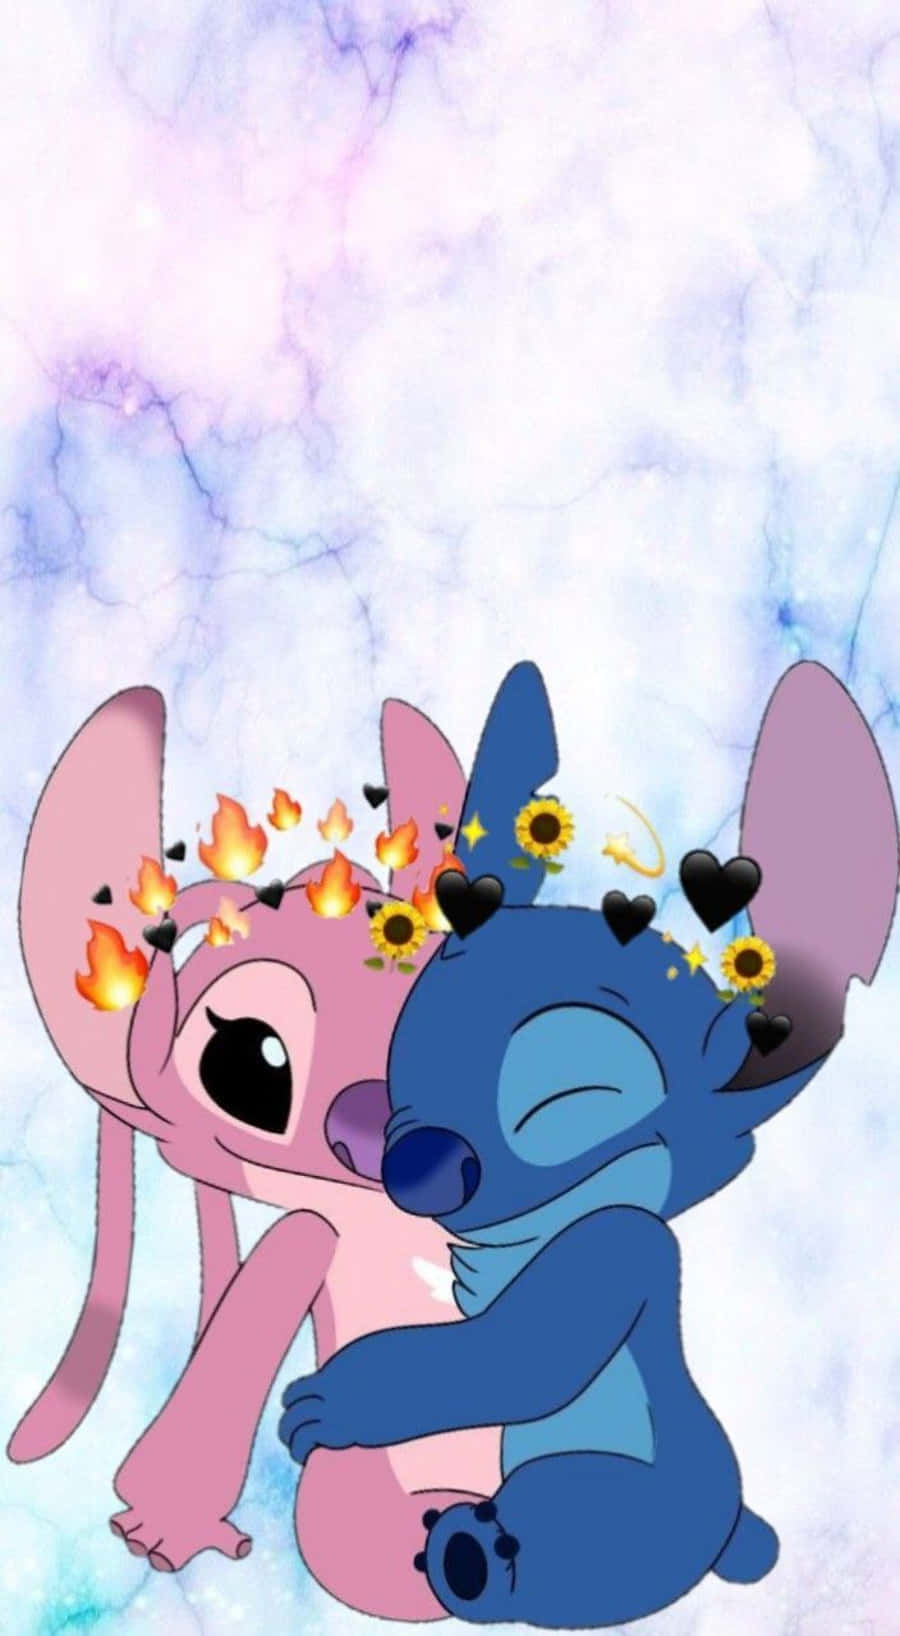 Angel and Stitch Embrace in a Warm Hug Wallpaper